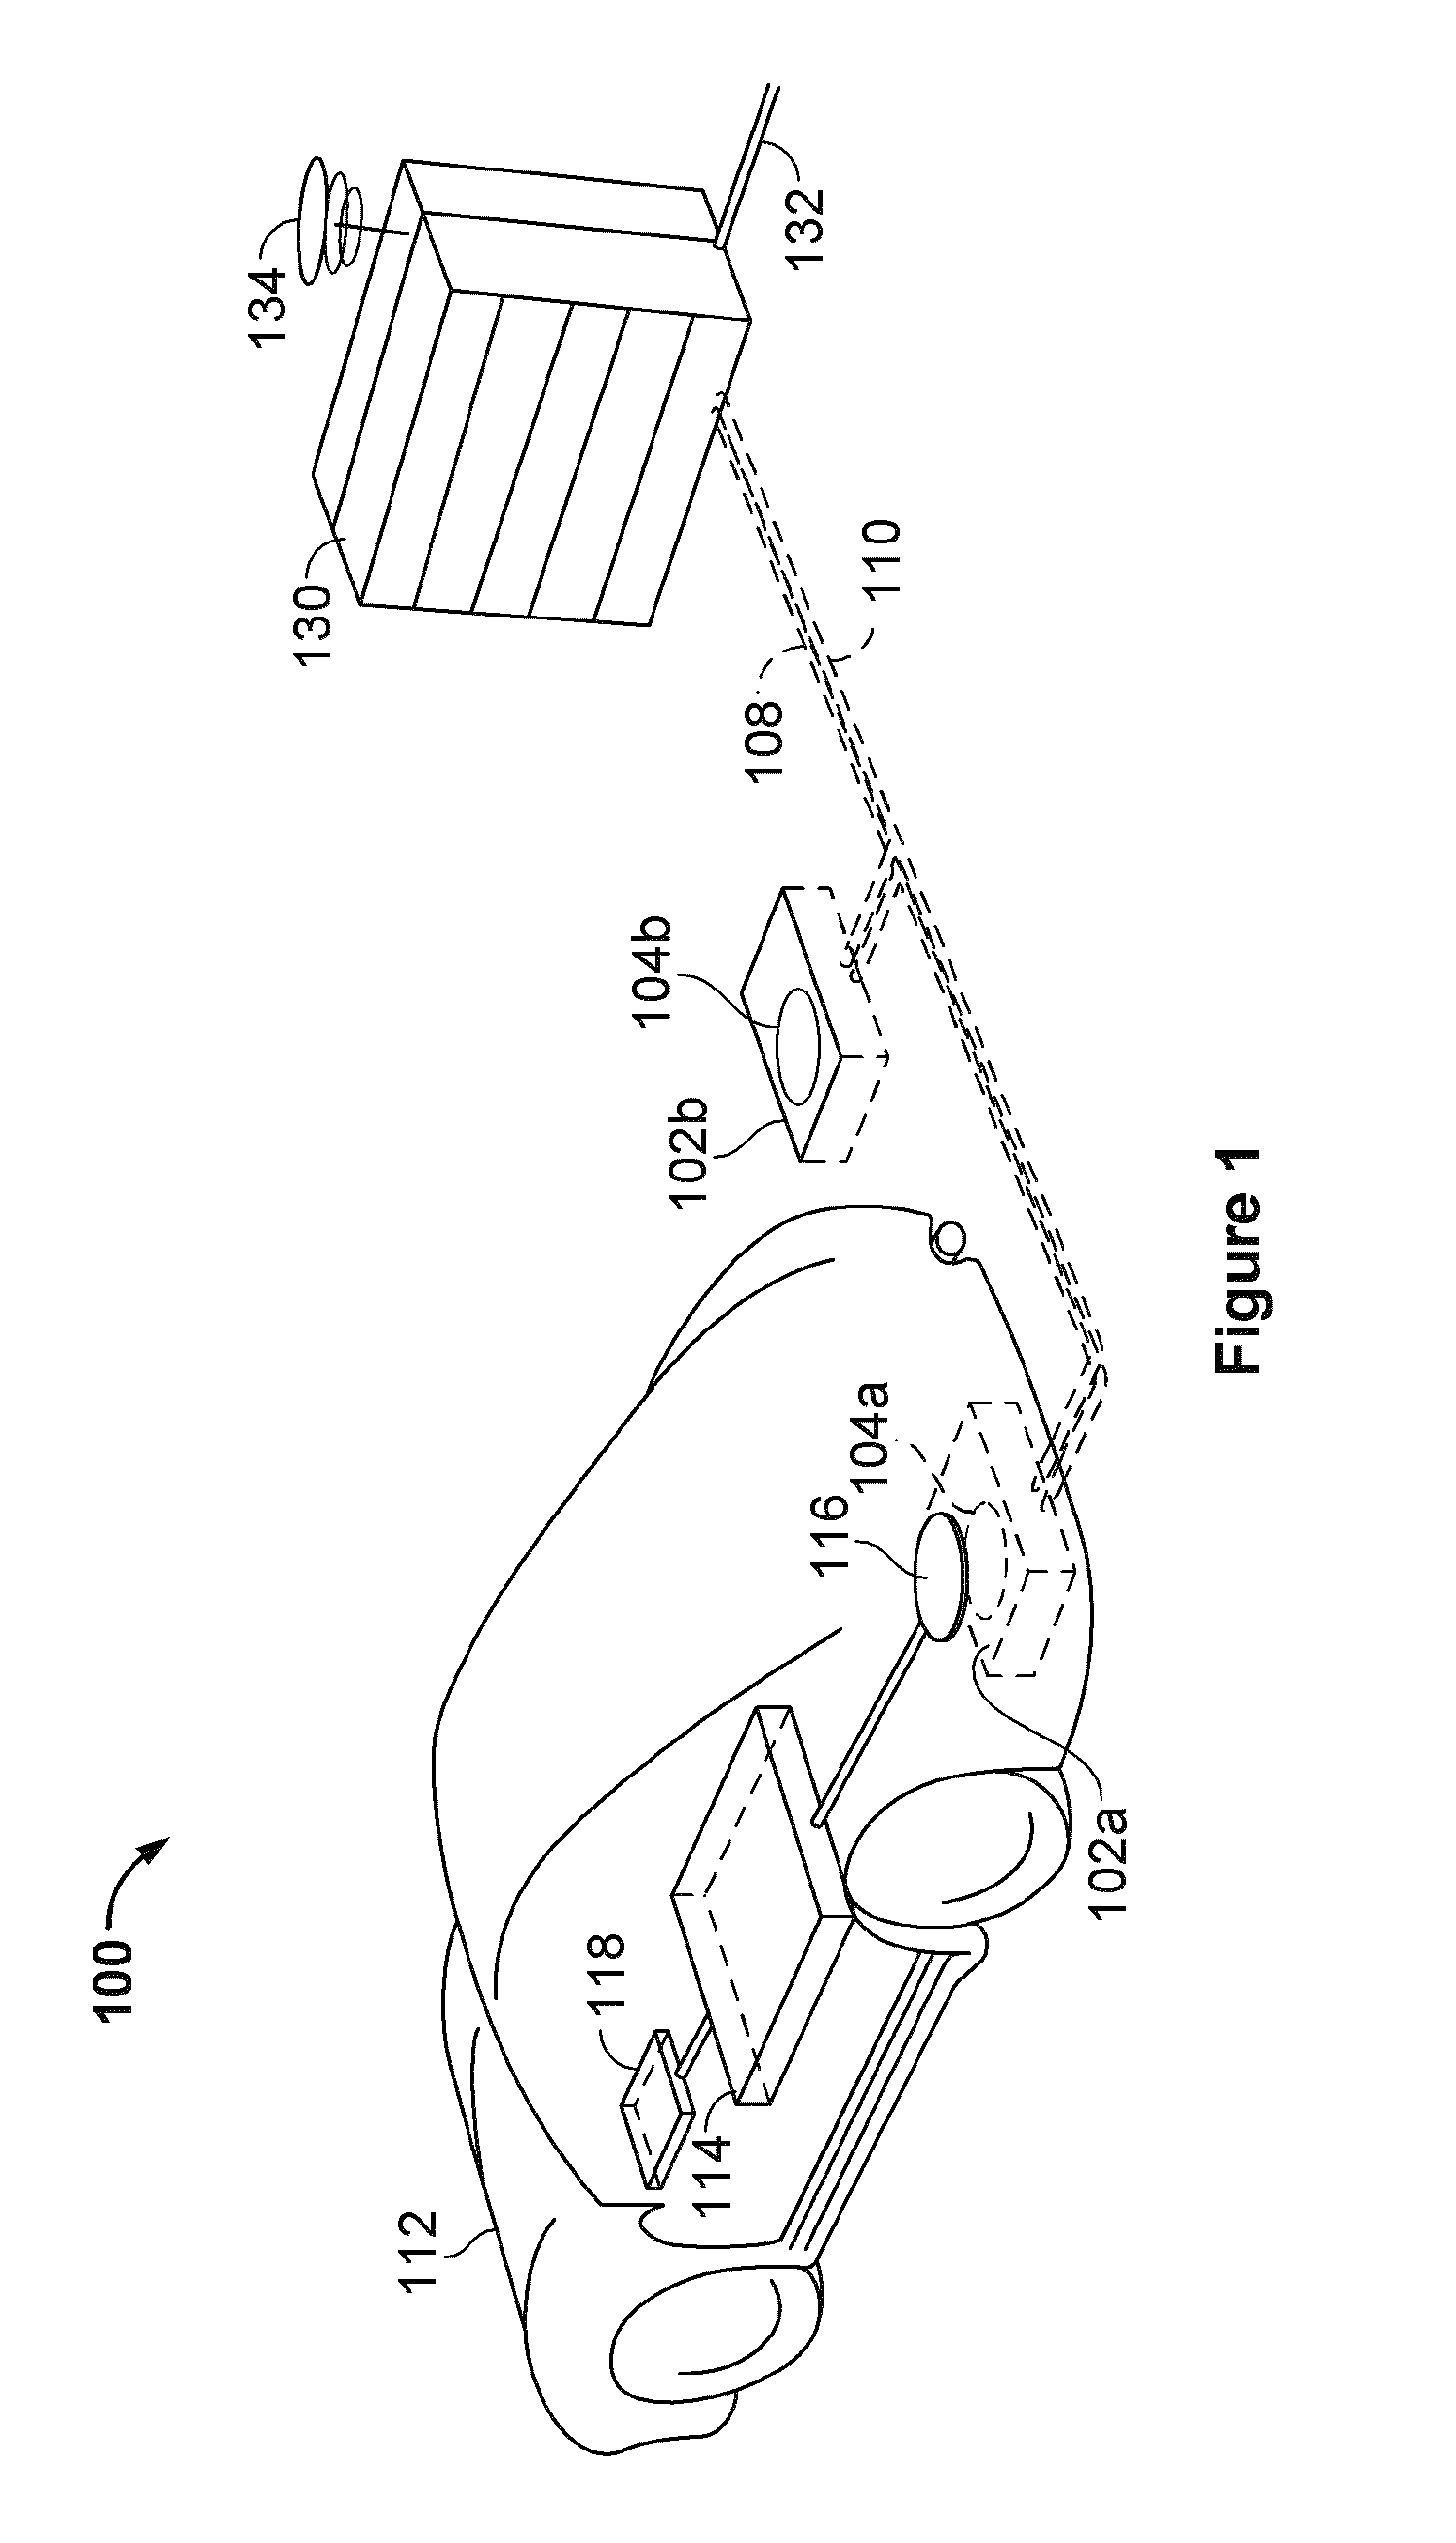 Systems, methods, and apparatus for radar-based detection of objects in a predetermined space